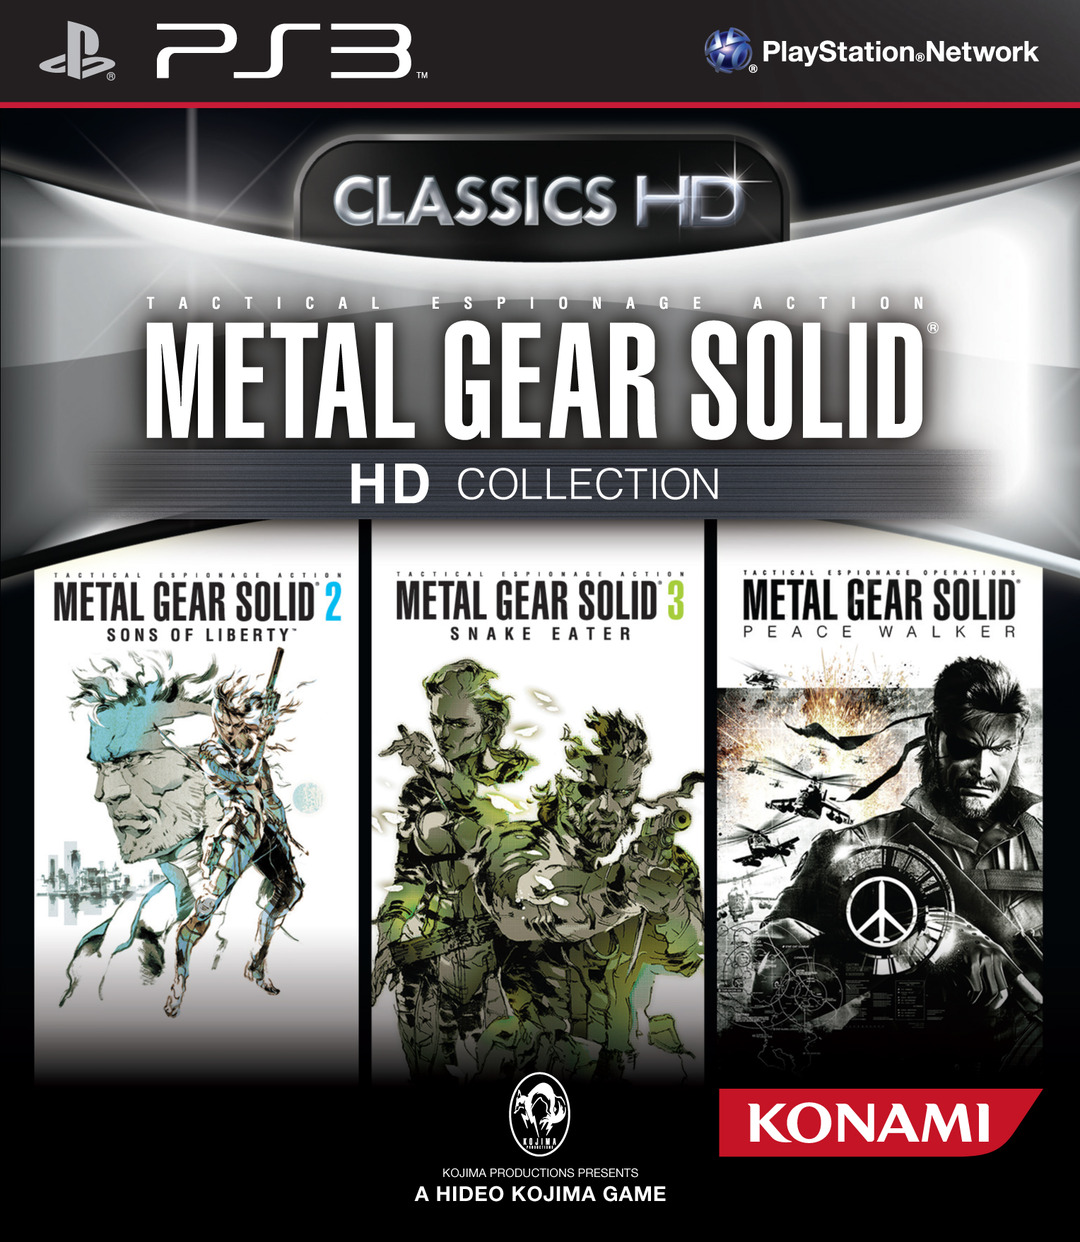 jaquette-metal-gear-solid-hd-collection-playstation-3-ps3-cover-avant-g-1313607065.jpg